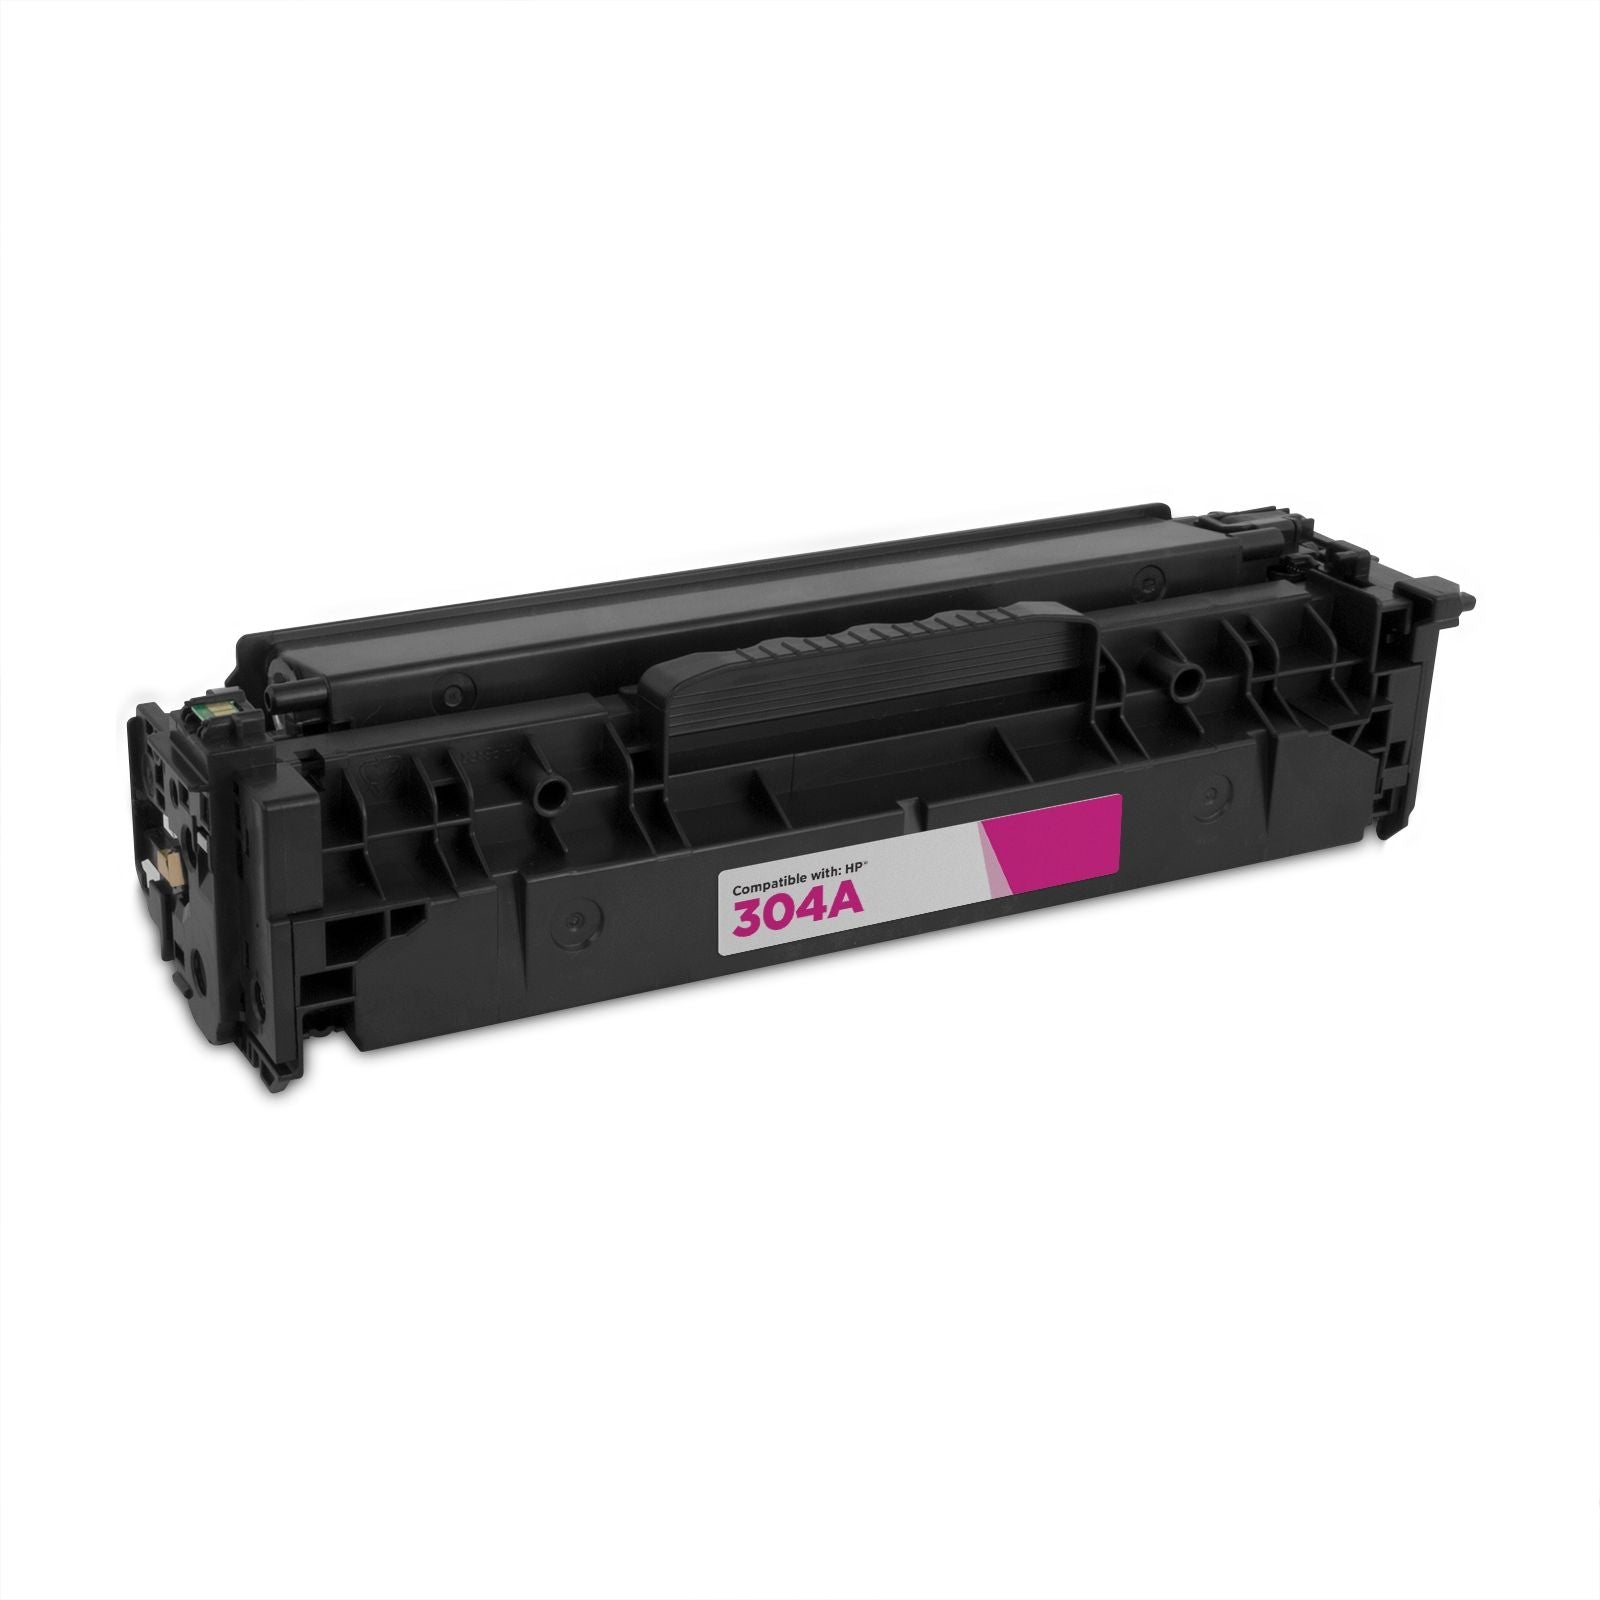 IMPERIAL BRAND Compatible toner cartridge for HP 304A MAGENTA TONER 2800 PAGES